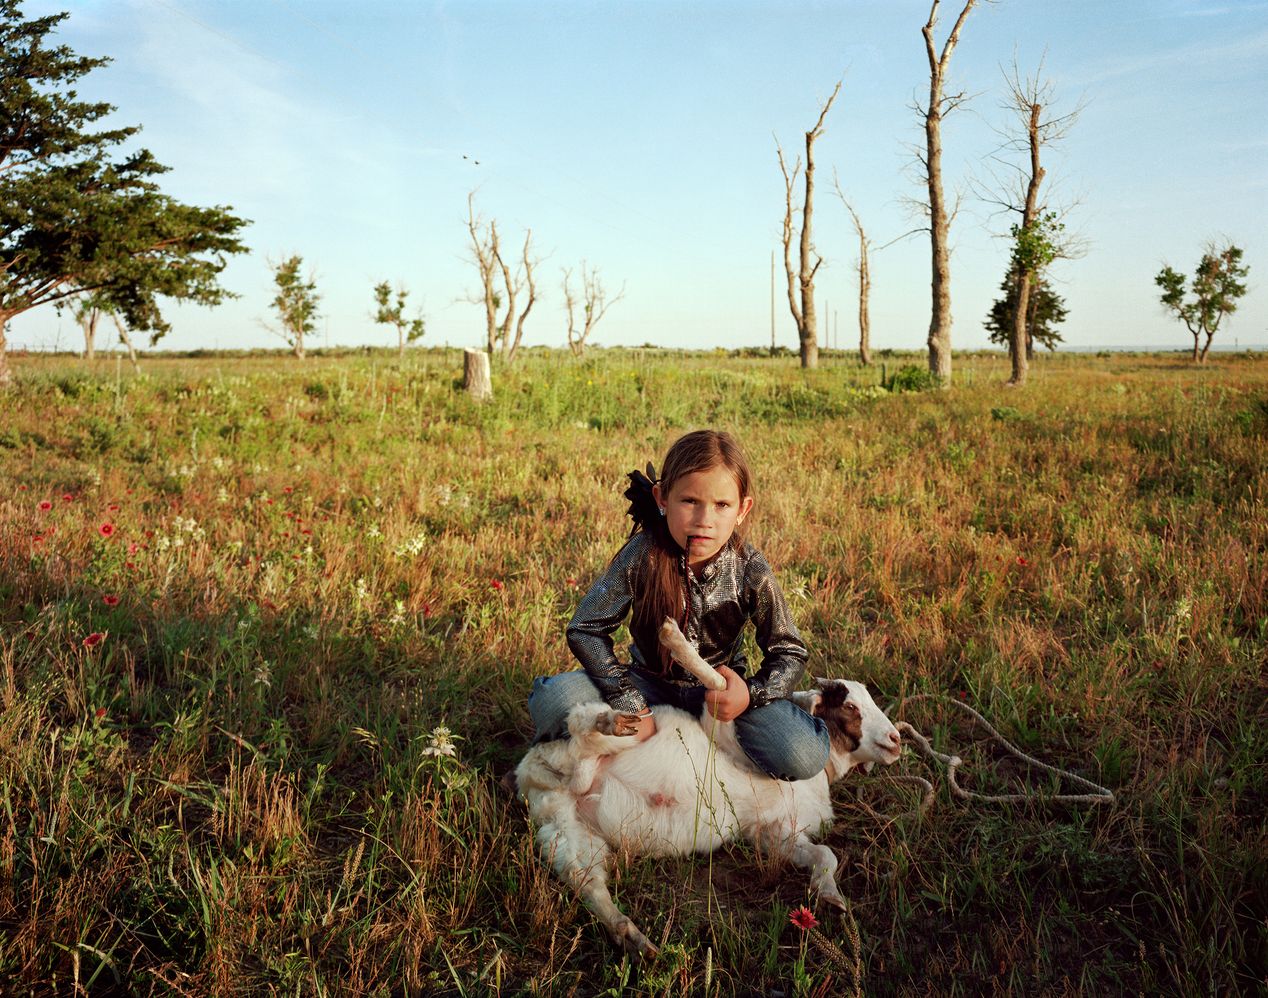 Young cowgirl holding a goat down, environmental portrait photography, Ilona Szwarc, contemporary Los Angeles artist.